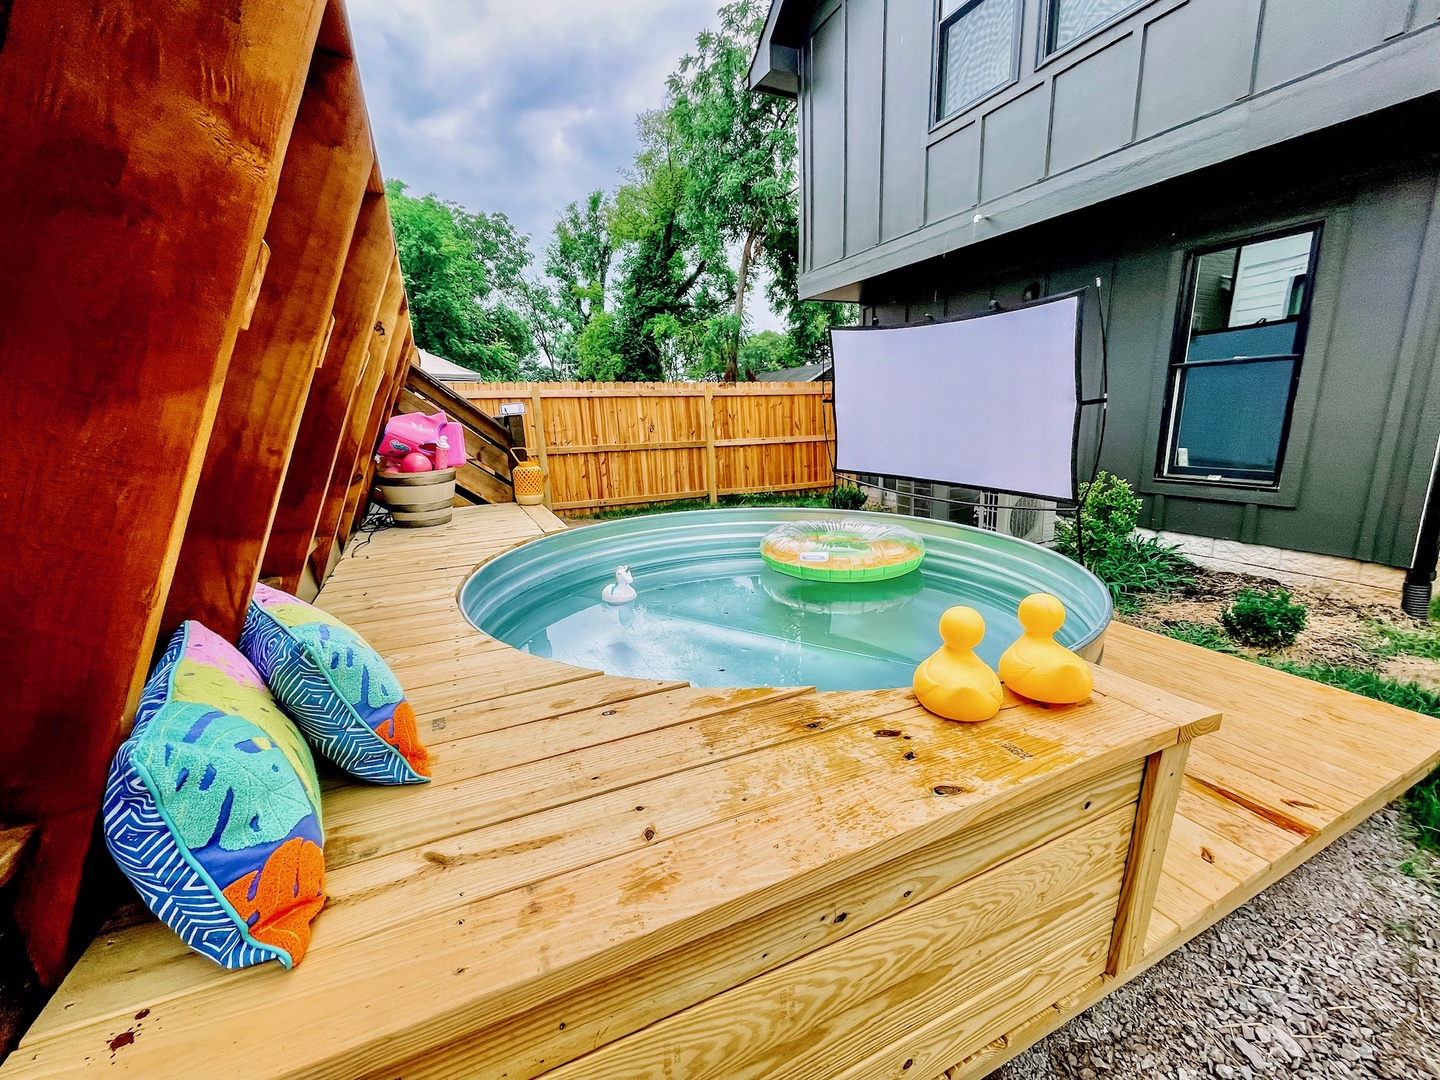 Enjoy an outdoor, floating movie night in the stock tank pool!